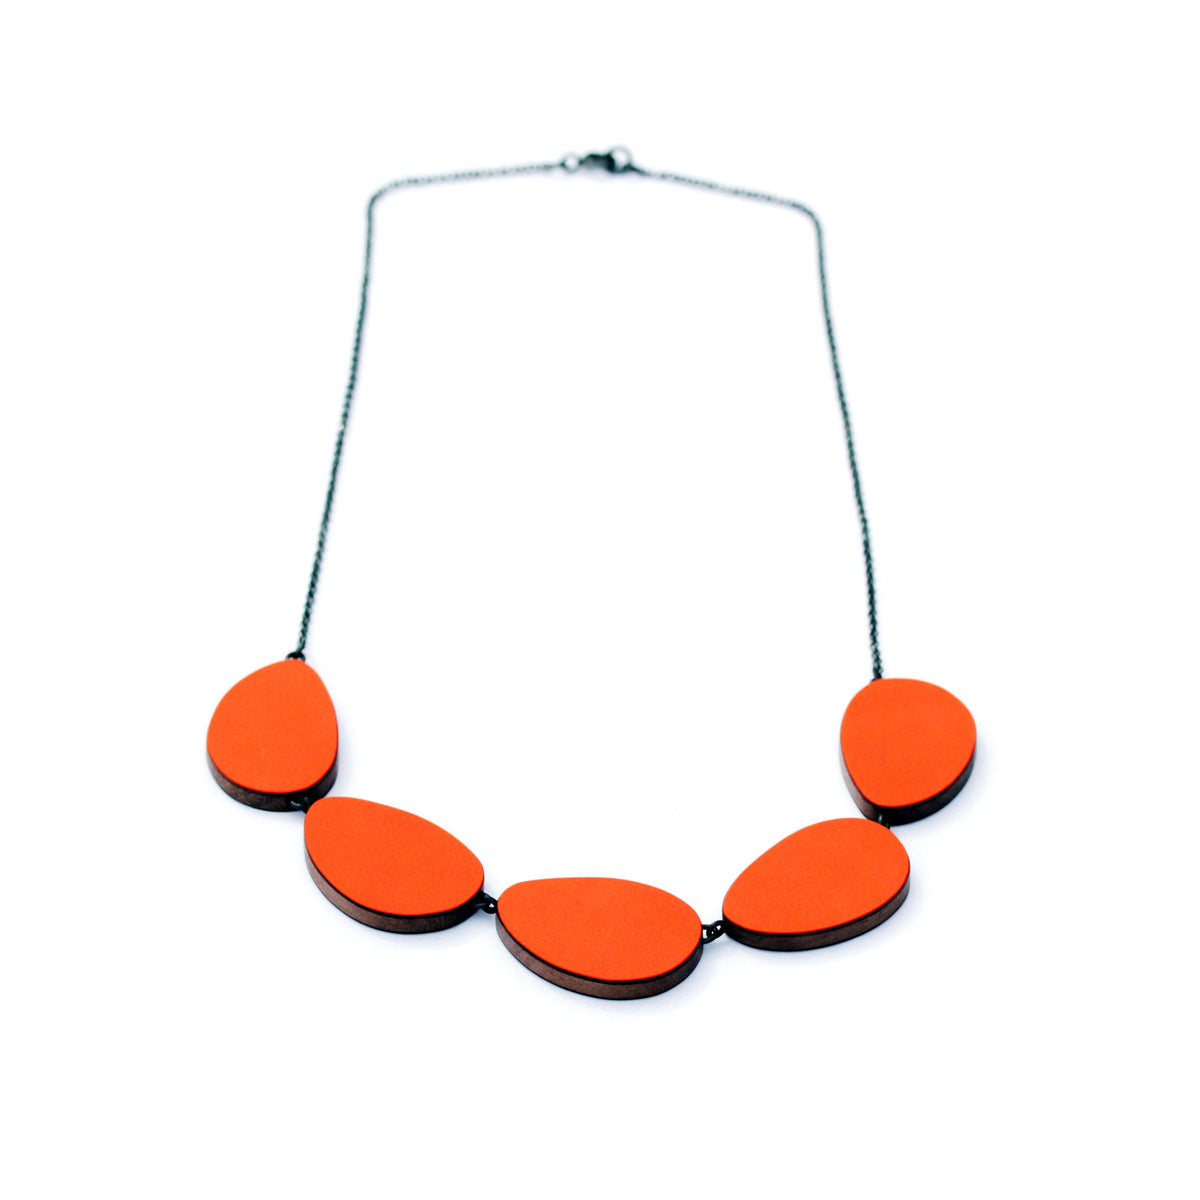 Five part curve necklace (reversible) - pink and orange